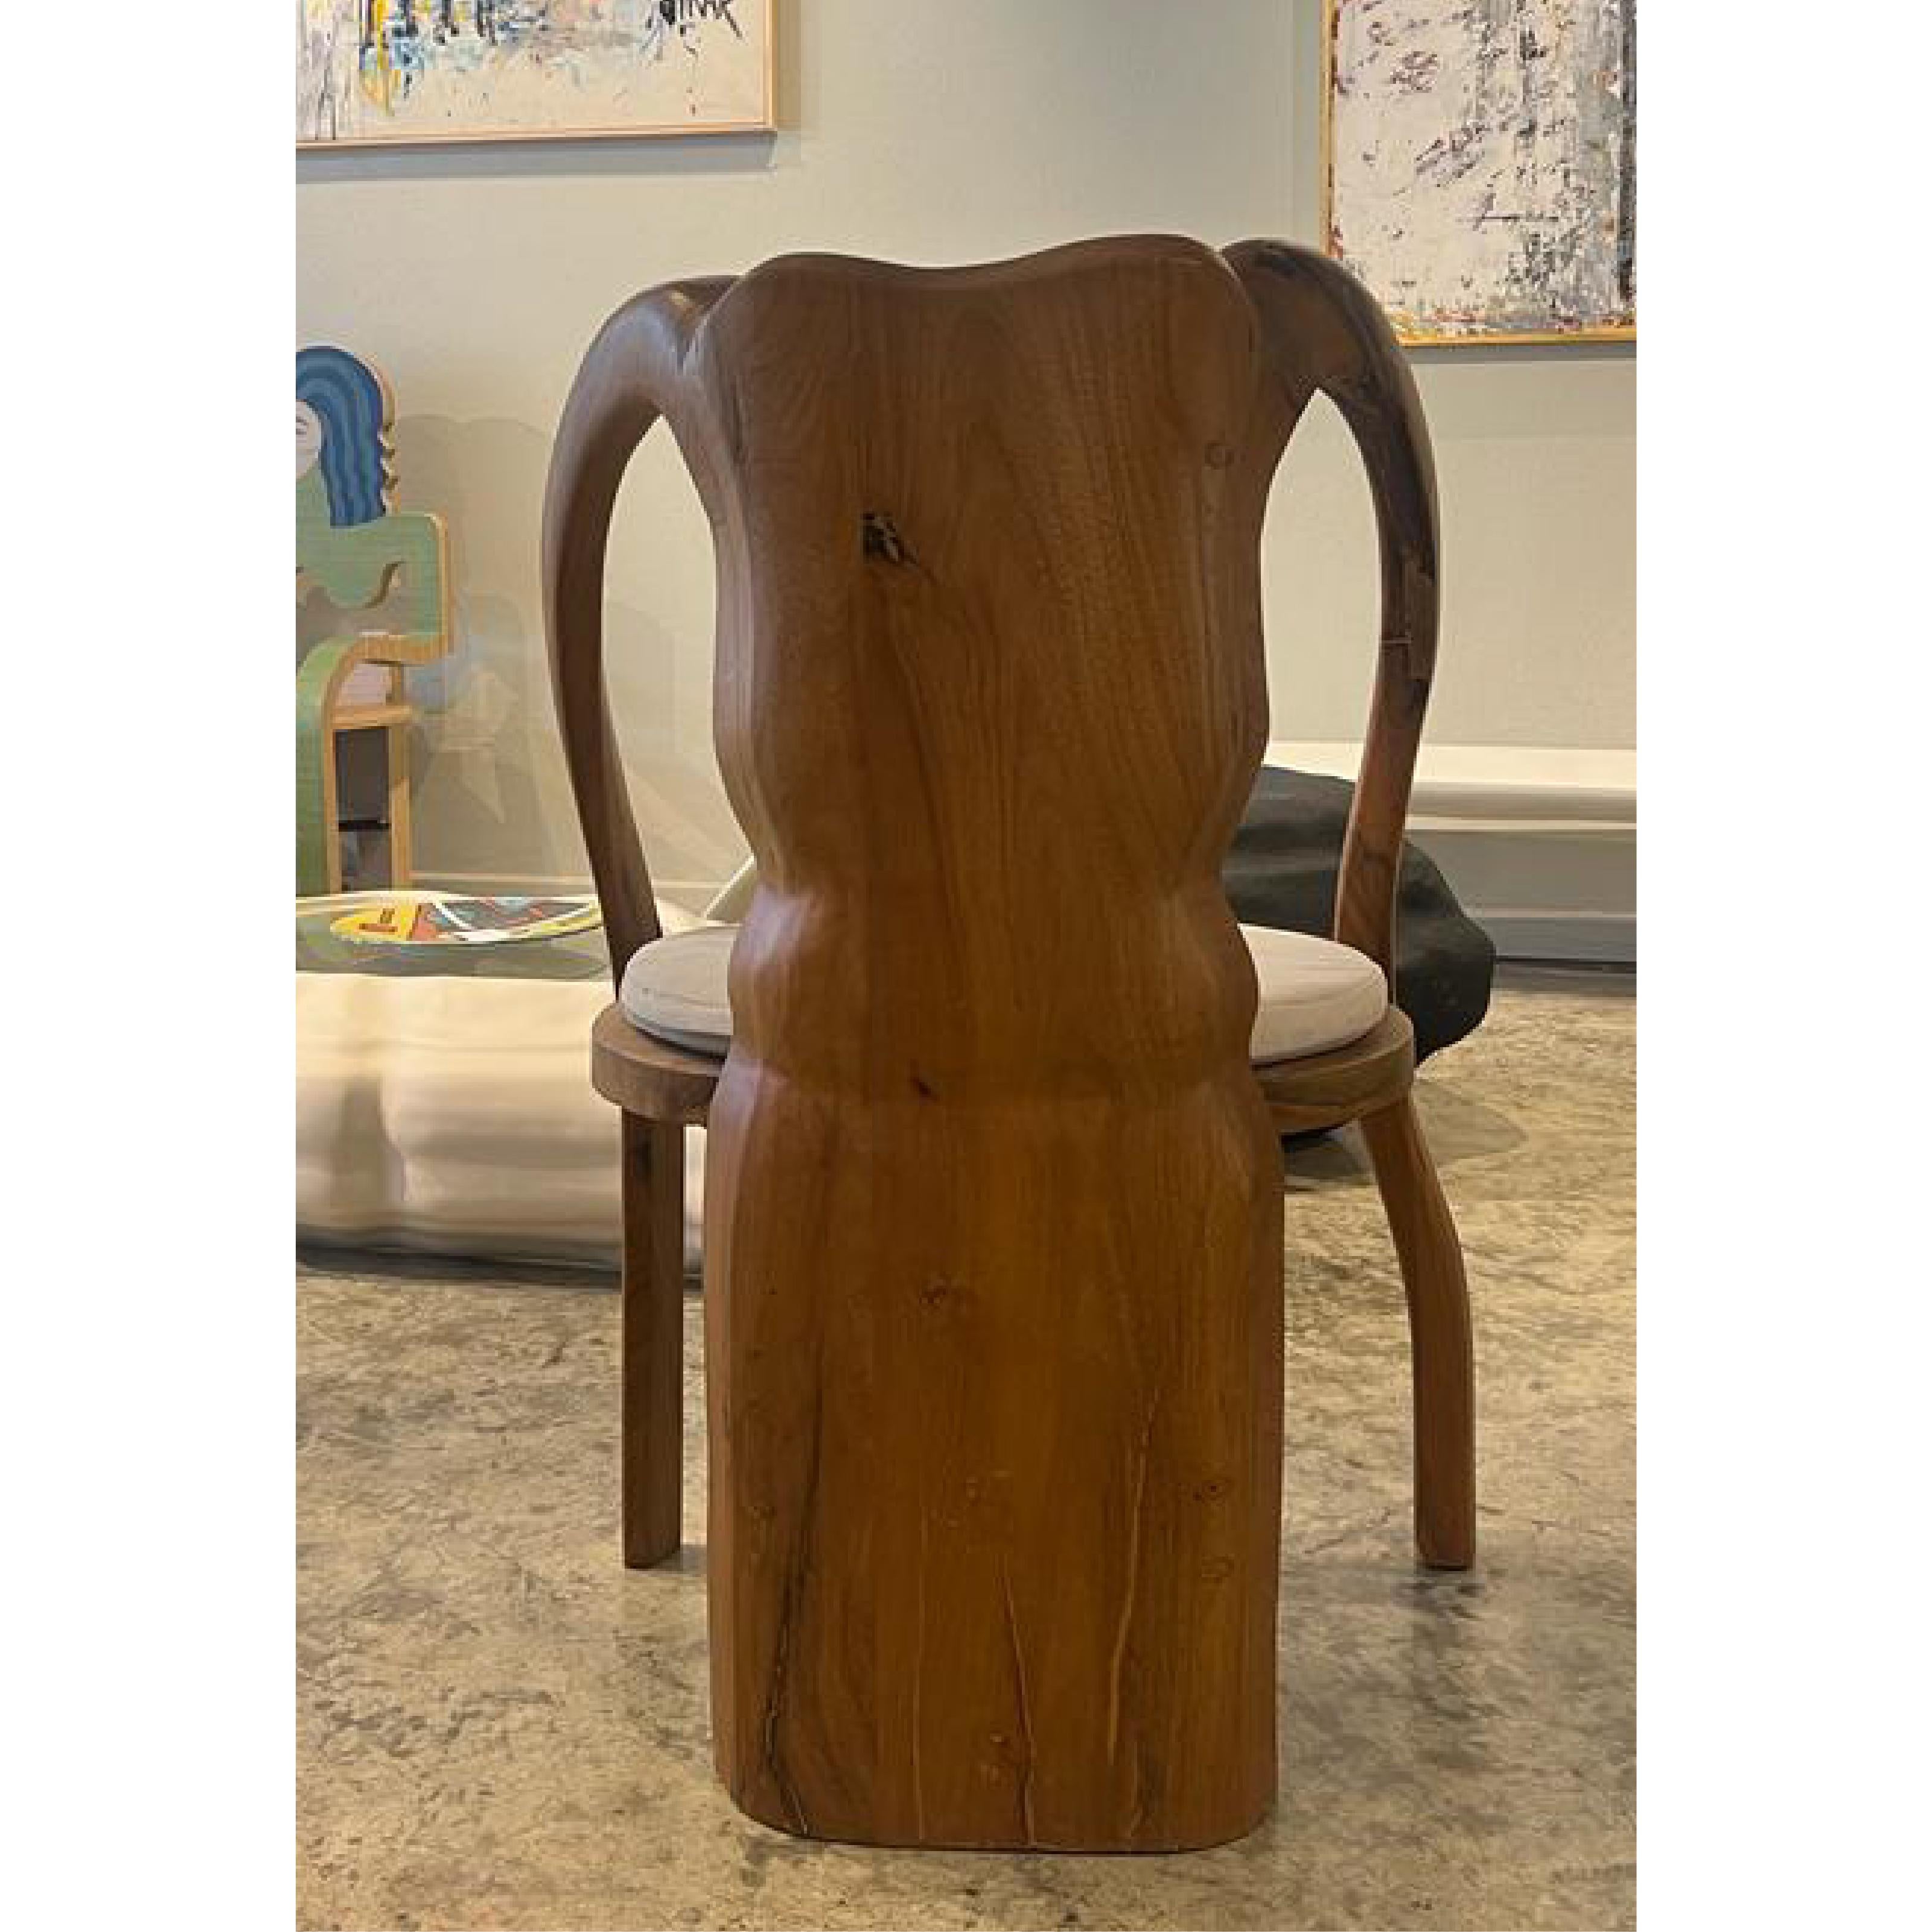 Egyptian Twin -  Wood Chair For Sale